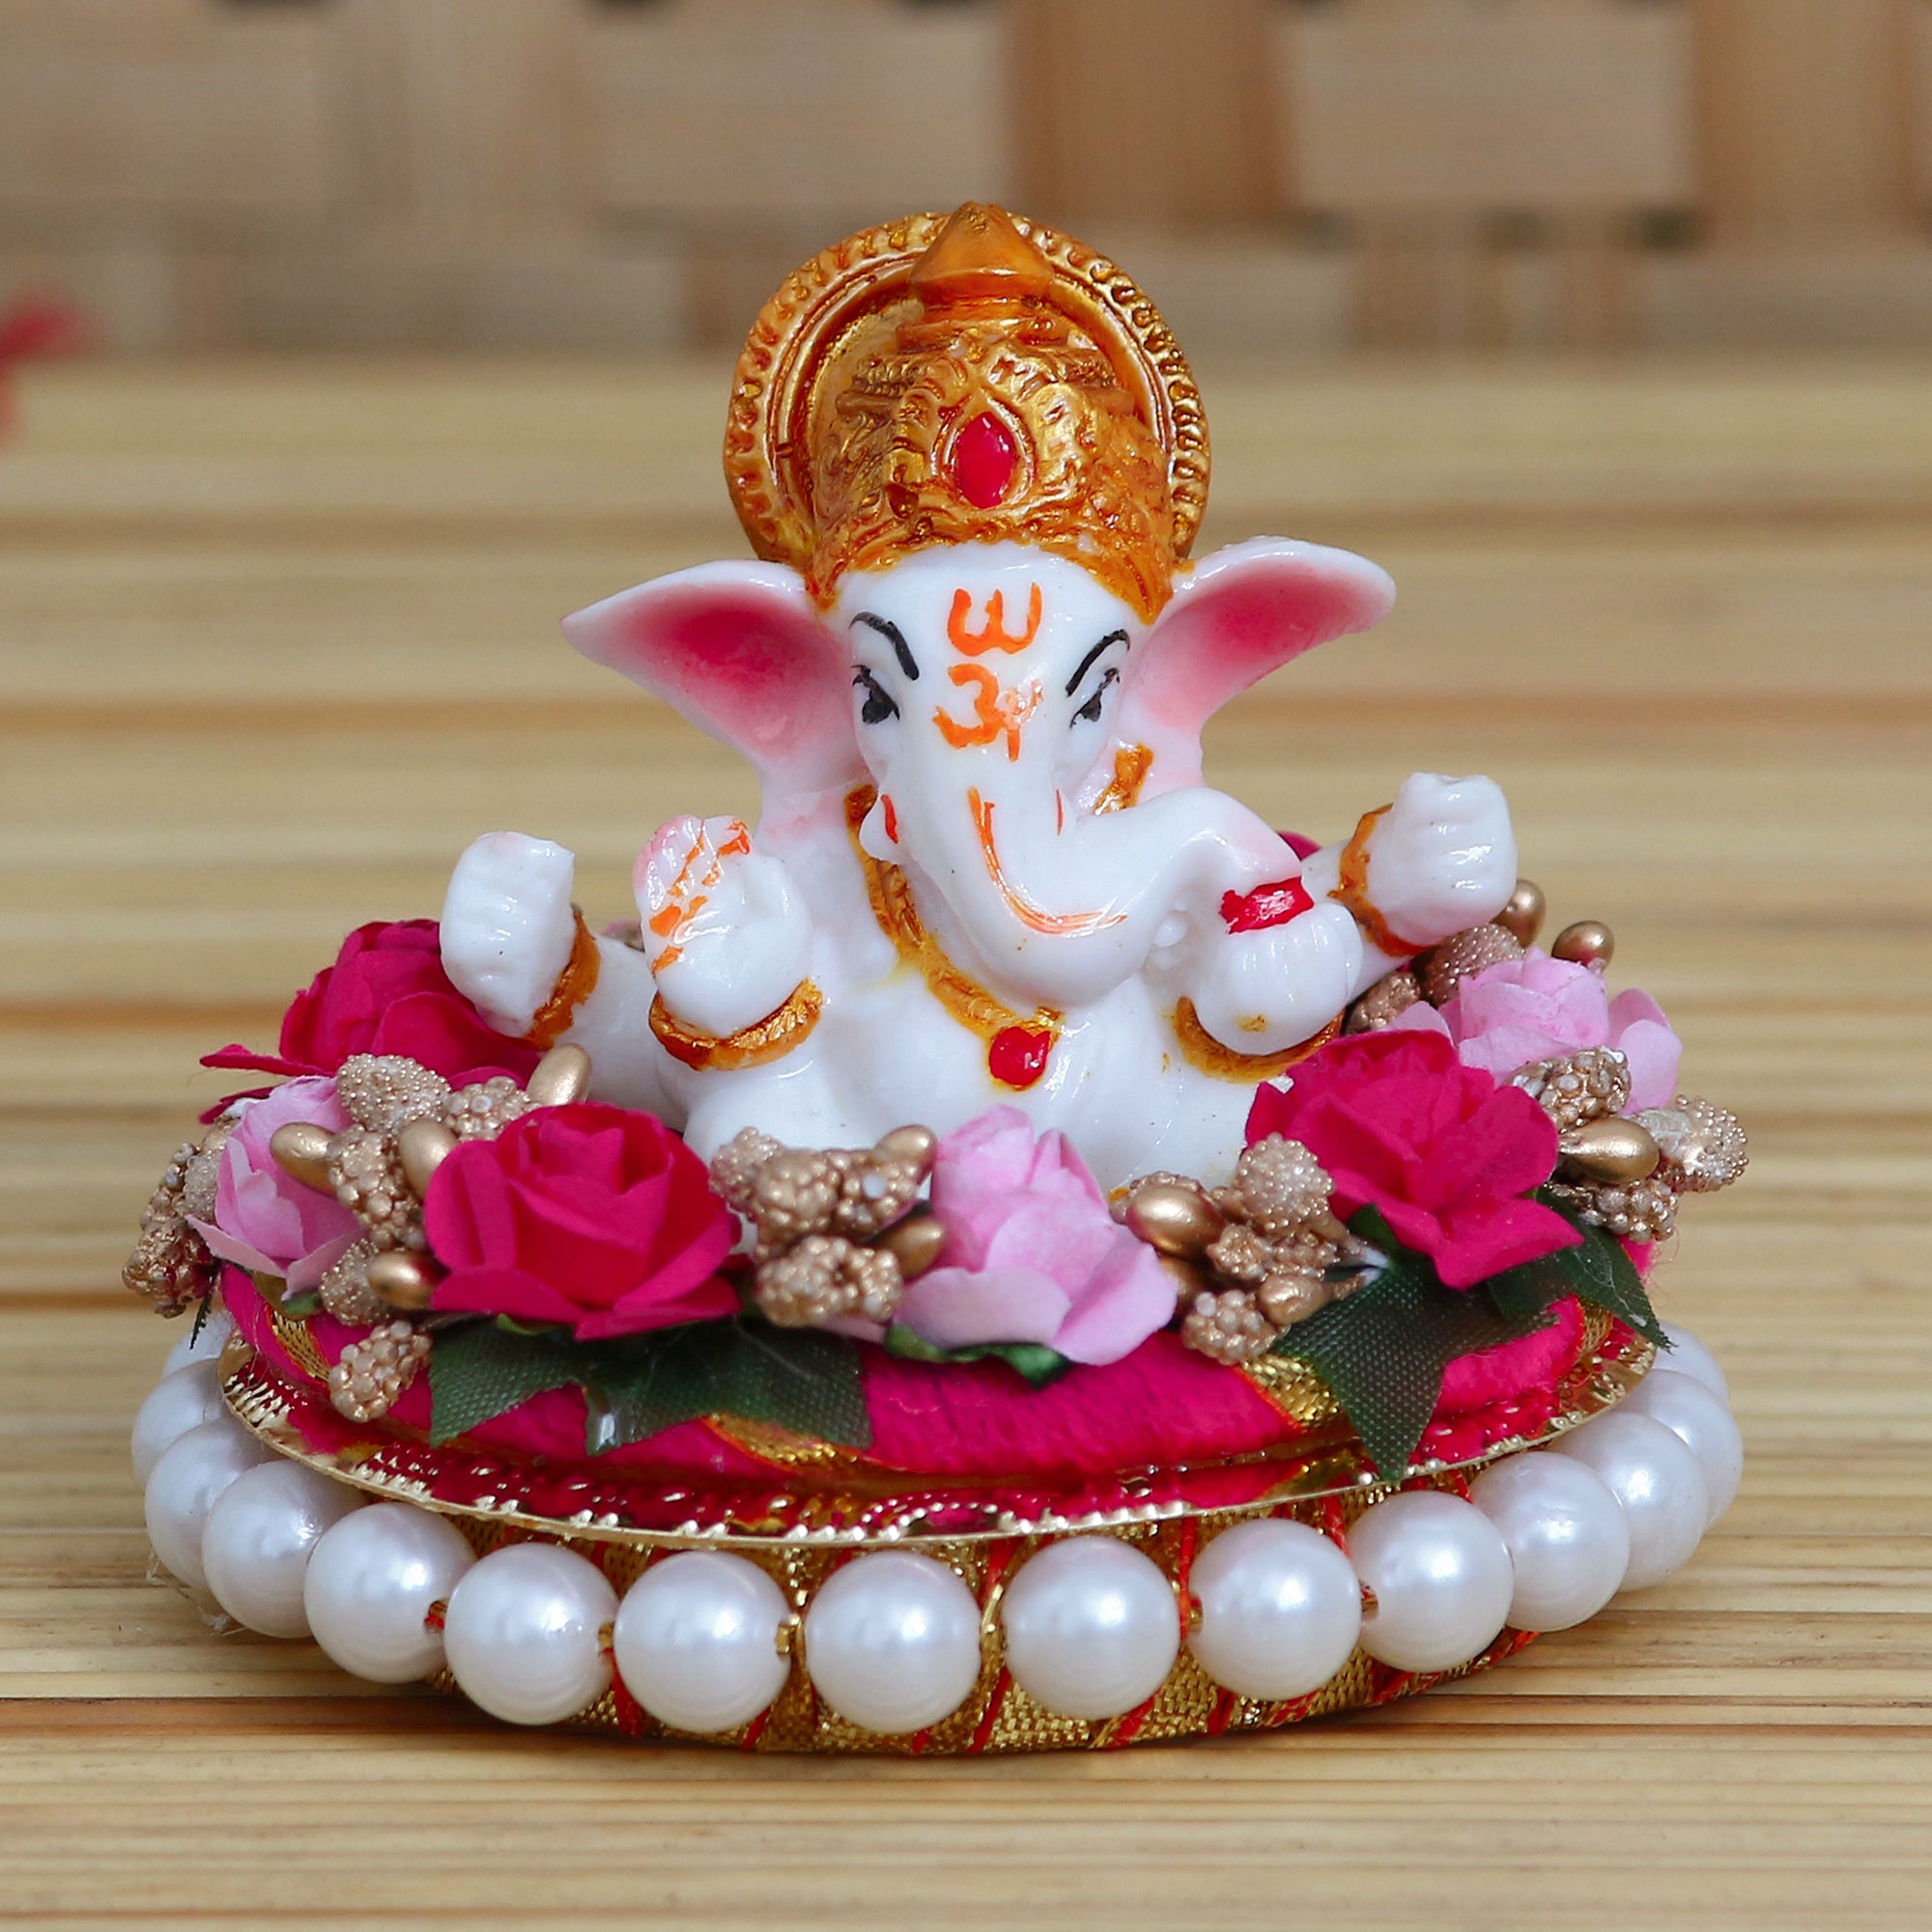 Lord Ganesha Idol On Decorative Handcrafted Colorful Flowers Plate